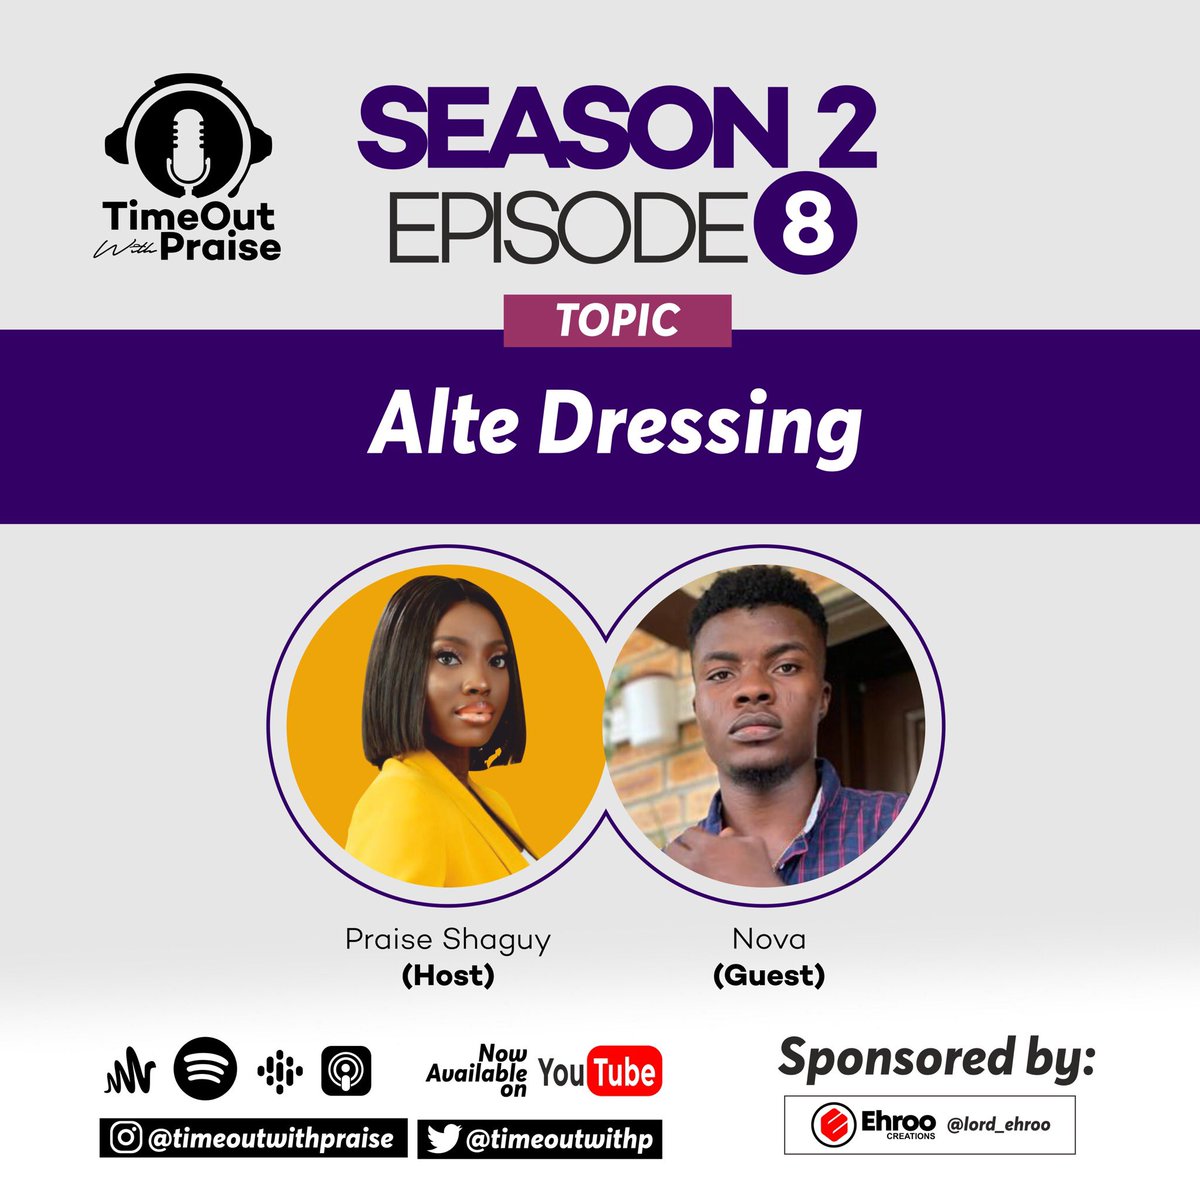 New episode out✨✨✨

Season 2 Episode 8

Alte Dressing

YouTube youtu.be/c7x2S_wRRBE

Anchor anchor.fm/timeoutwith-pr…

Spotify open.spotify.com/episode/5did0s…

#blackpodcasters 
#africanpodcasters 
#podcastersof9ja 
#altewears 
#alternativefashion 
#timeoutwithpraise